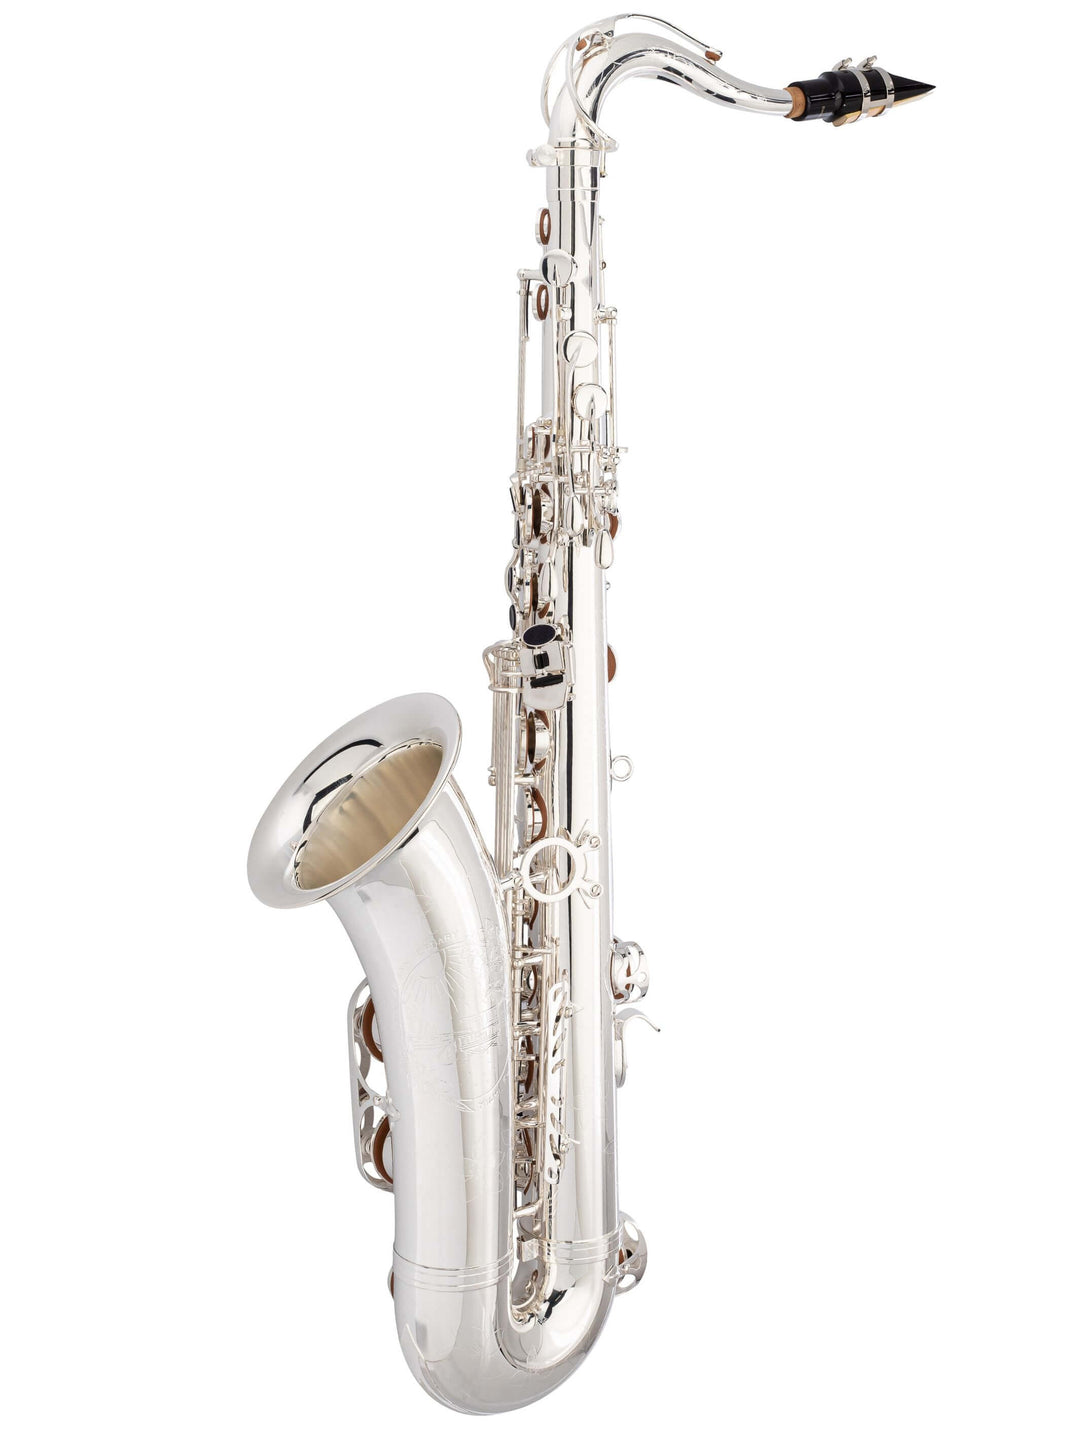 TS-860S Tenor Saxophone Silver-Plated Side View 2#finish_brass